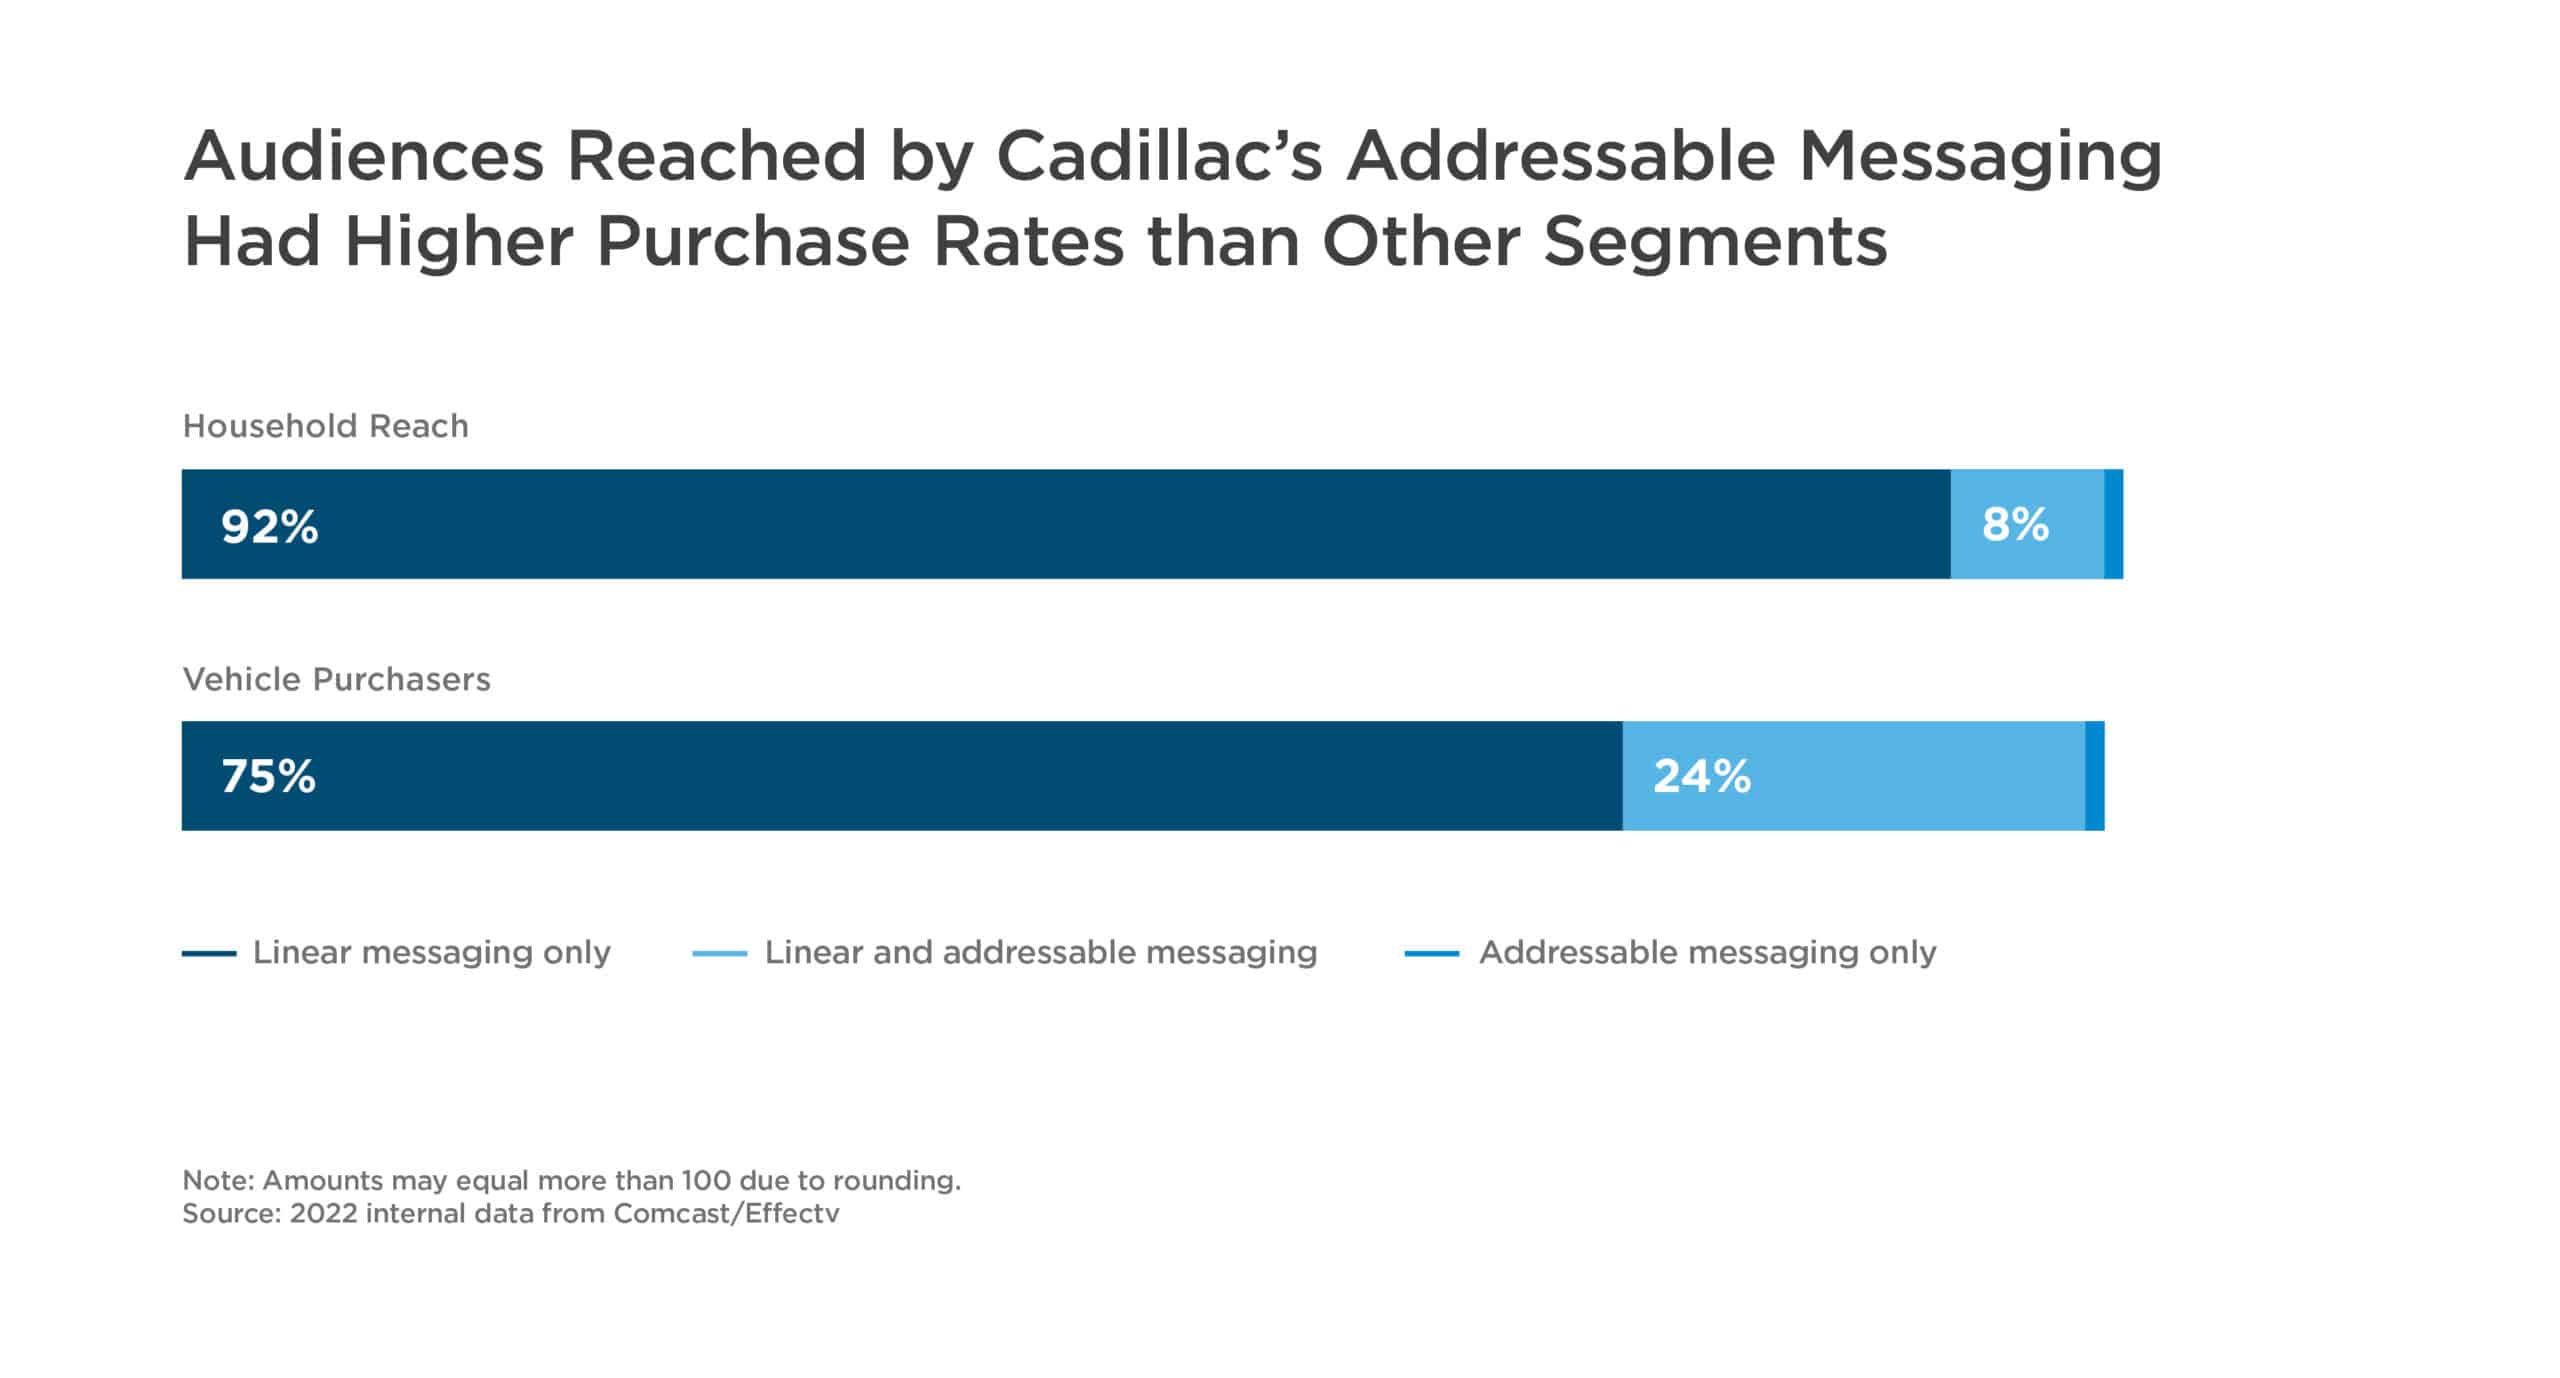 Audiences reached by Cadillac's addressable messaging had higher purchase rates than other segments.